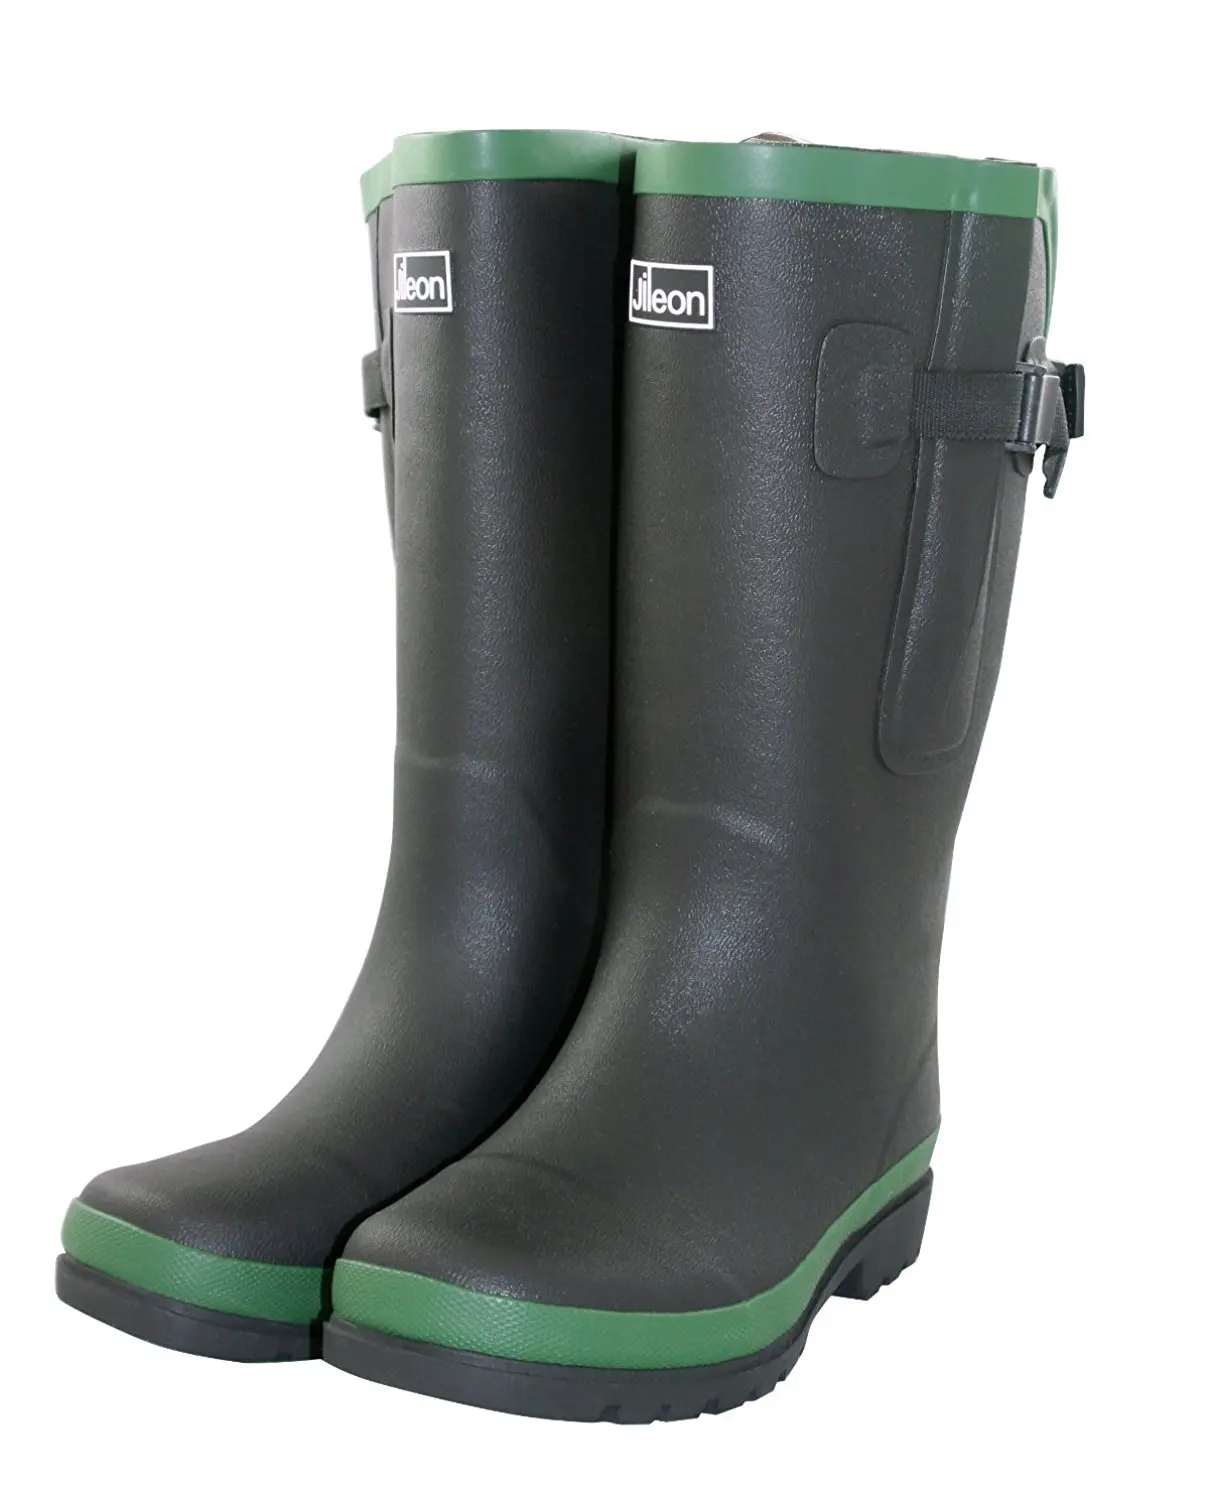 Cheap Wide Calf Rubber Boots, find Wide Calf Rubber Boots deals on line ...